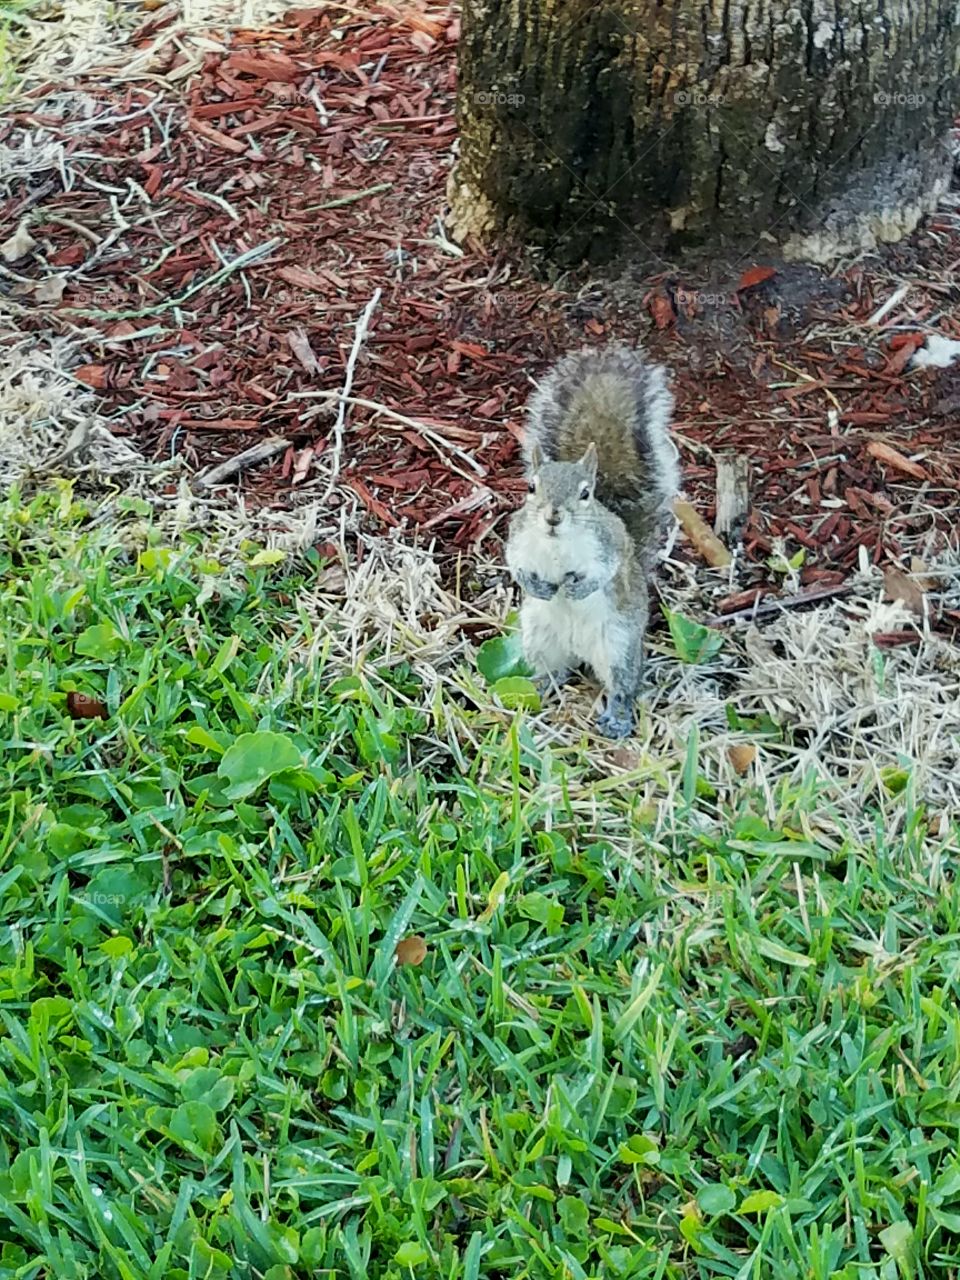 Squirrel in the Green Grass